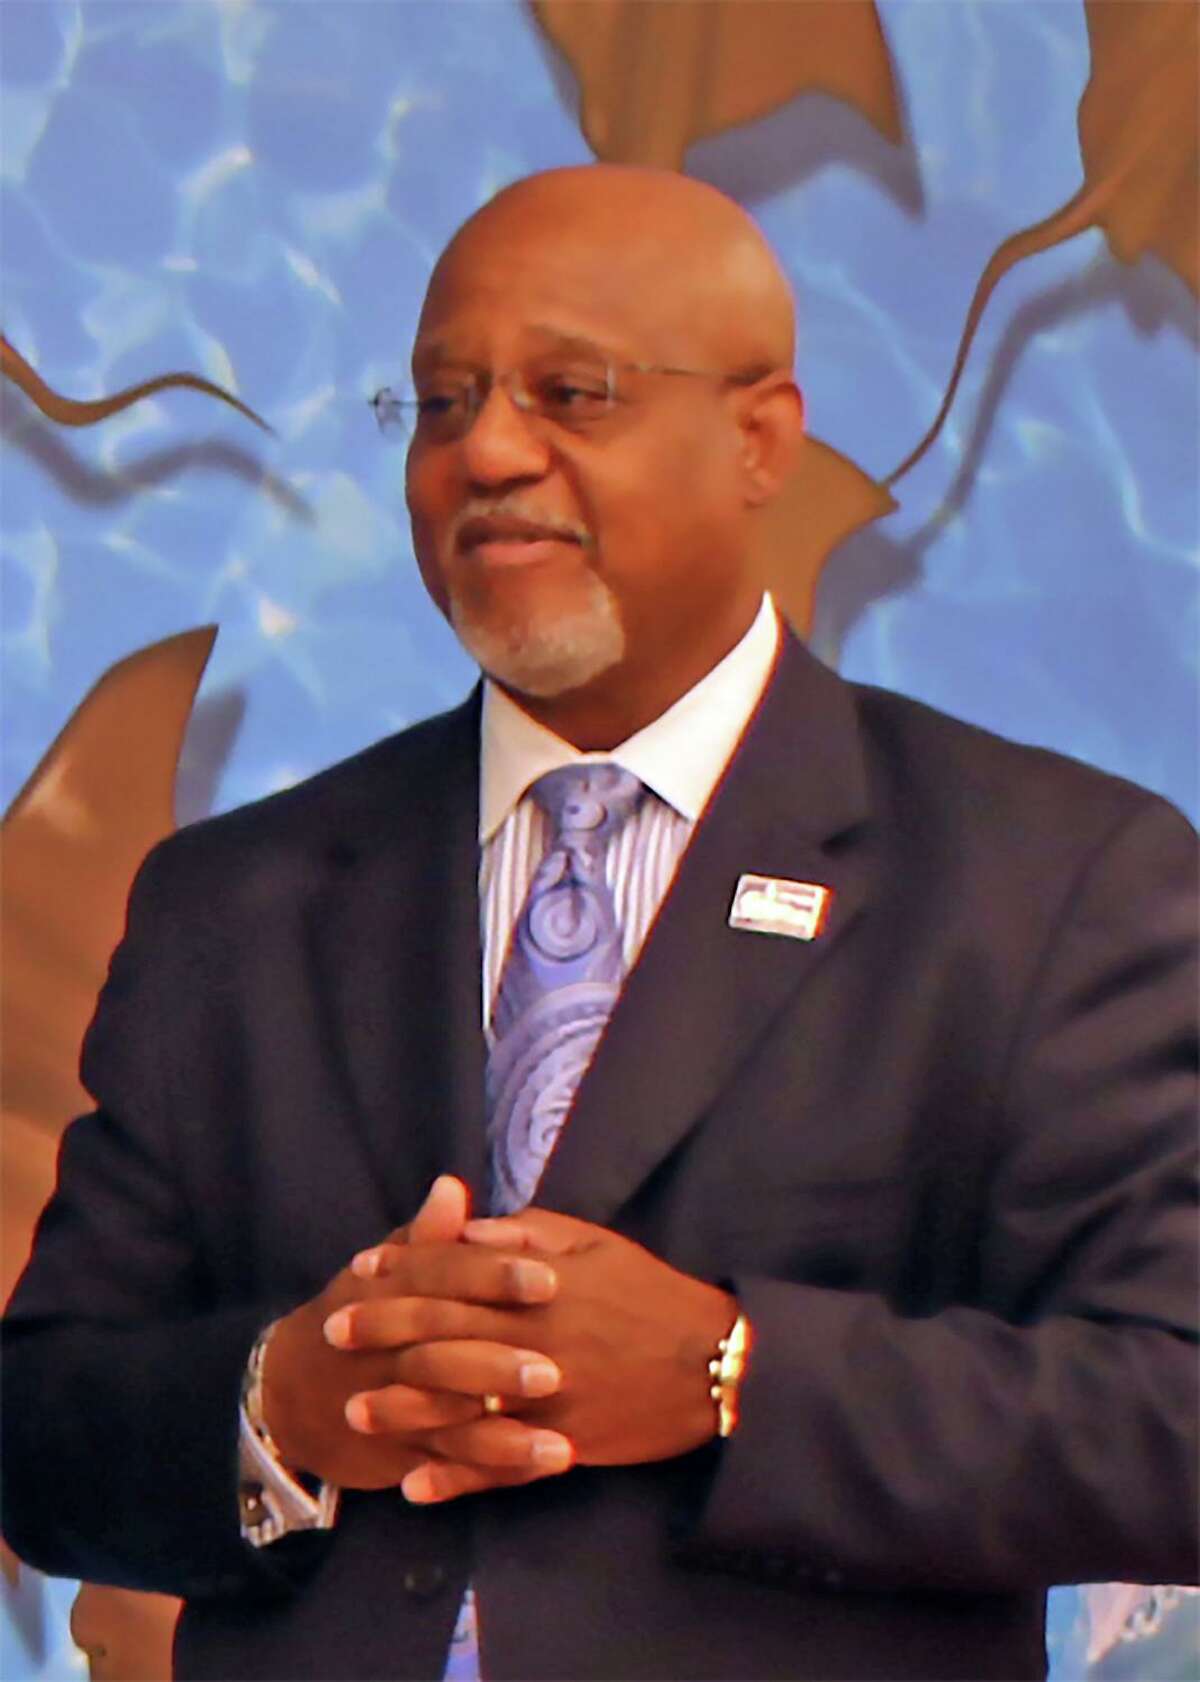 NORWALK, CT - The Rev. Dr. Lindsay E. Curtis of Grace Baptist Church in Norwalk is one of four new members of The Maritime Aquarium at Norwalk’s Board of Trustees.